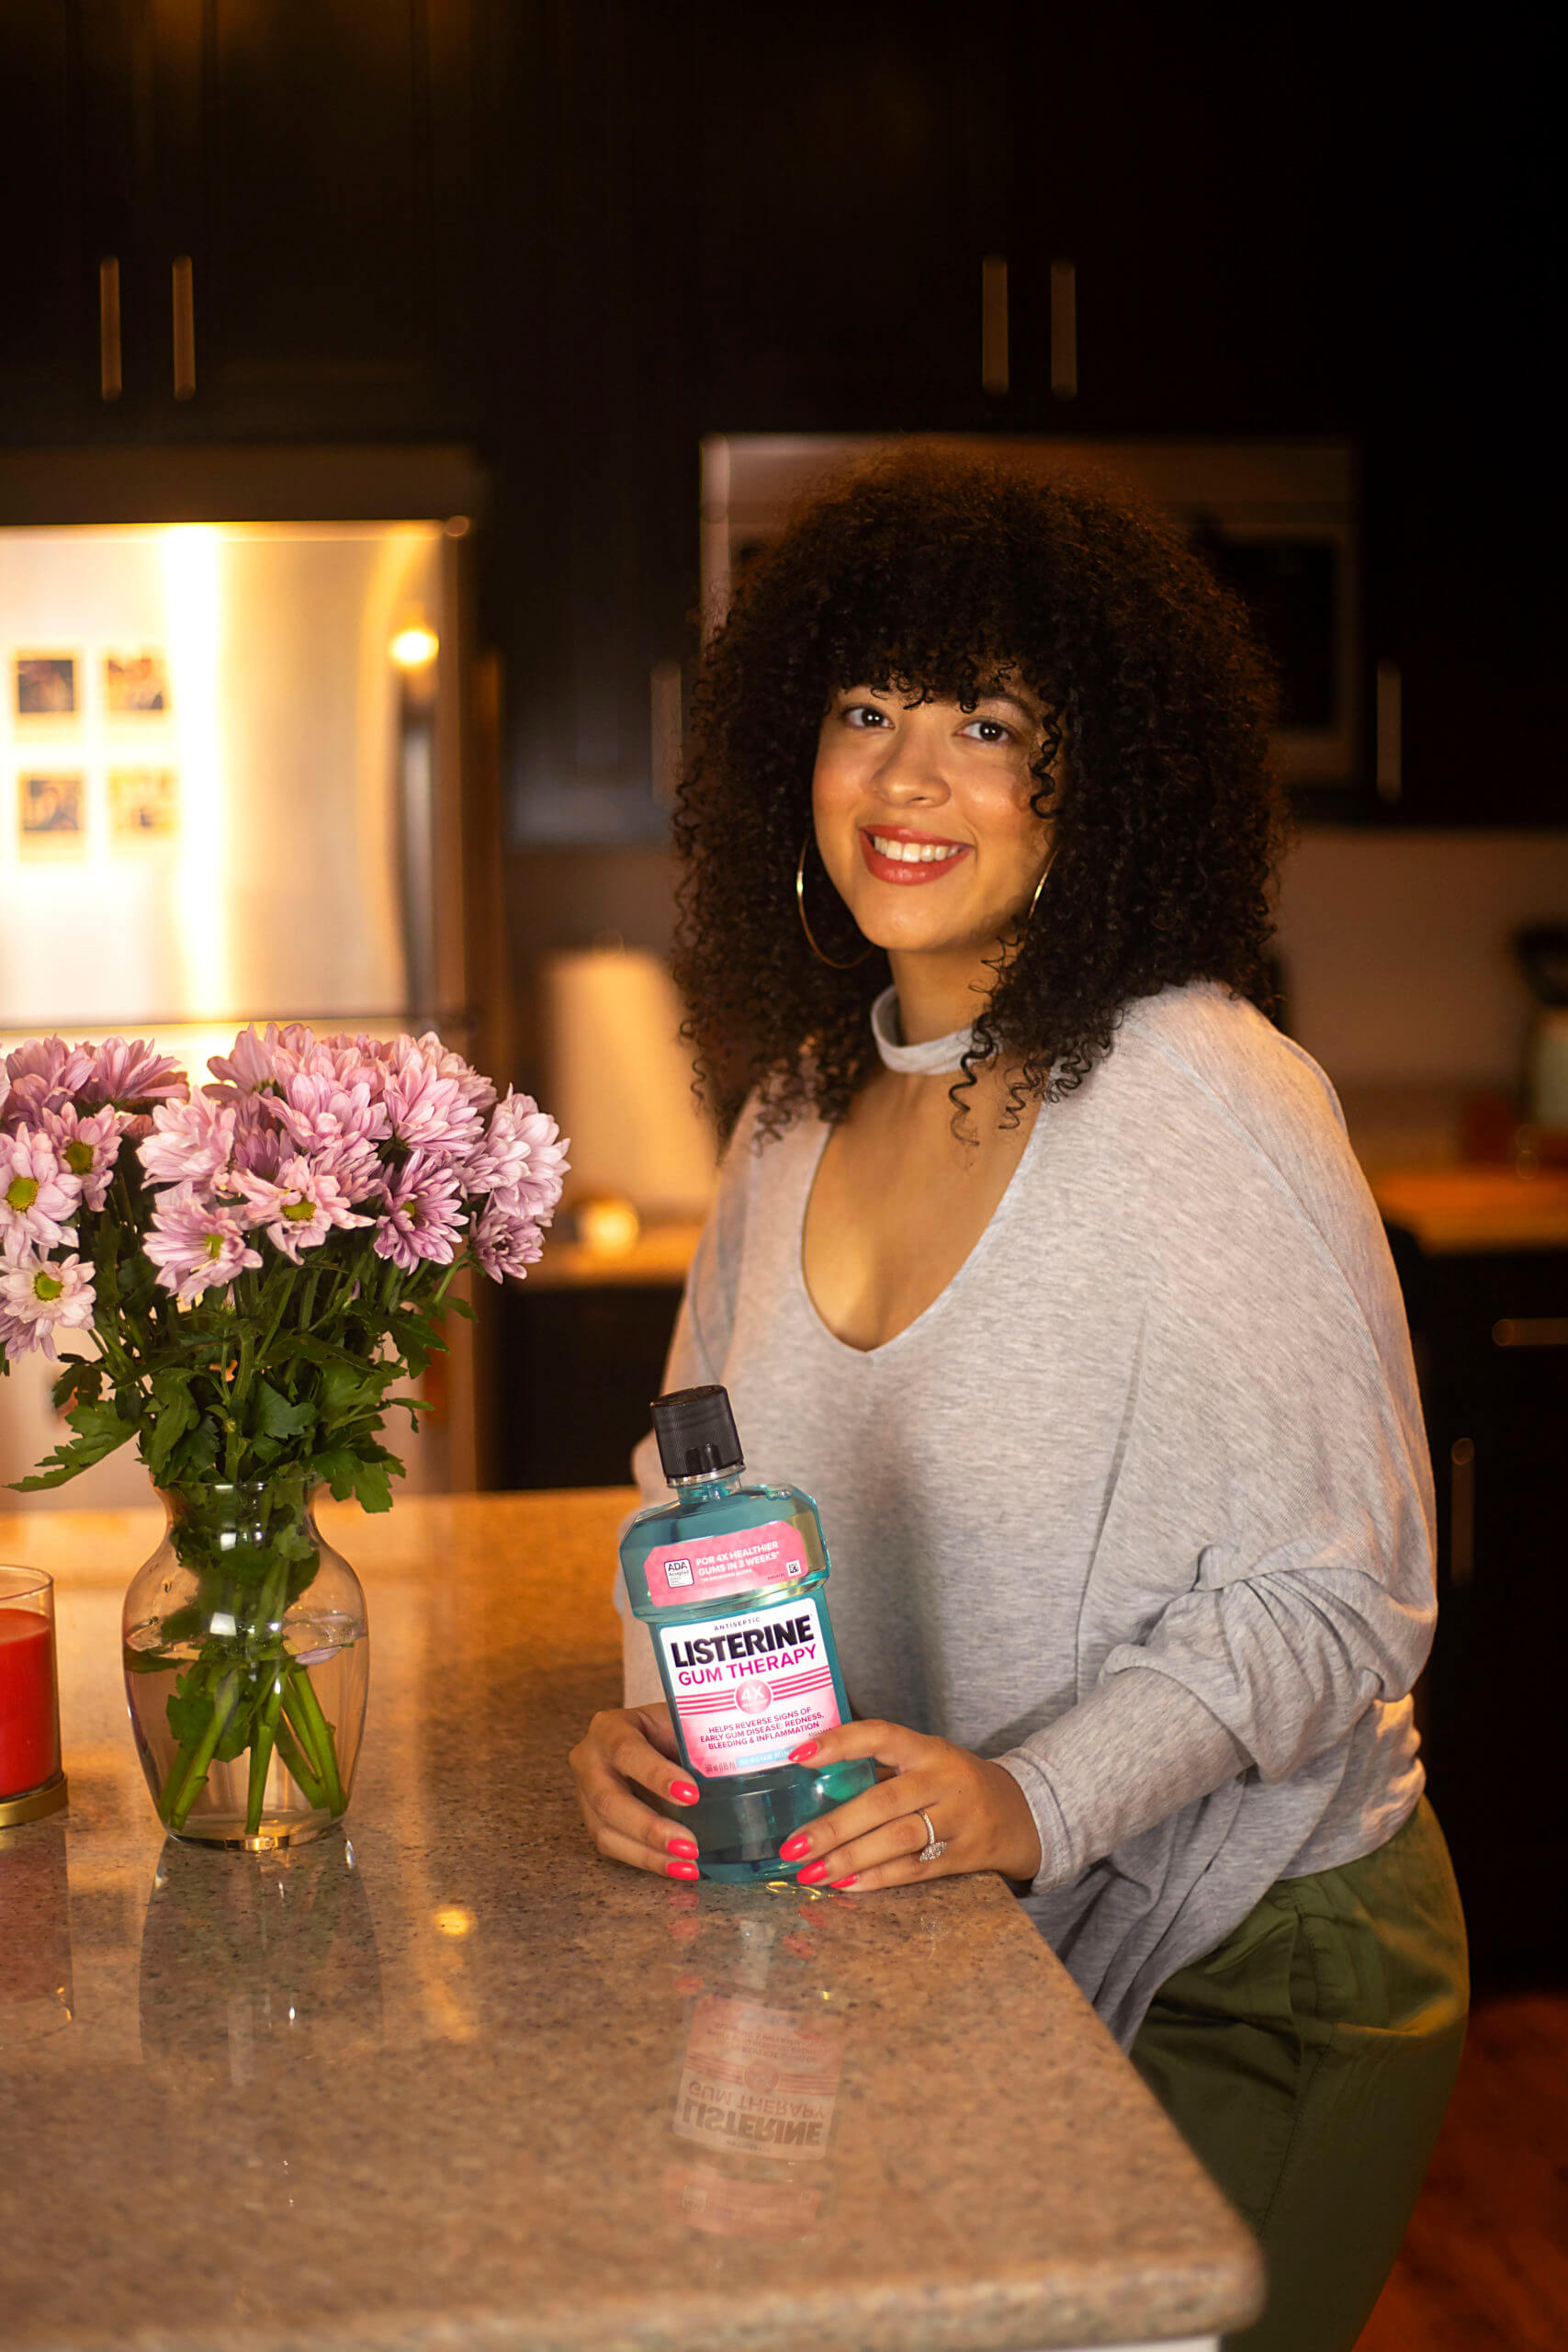 In today’s blog post, I’m sharing my nighttime routine and my favorite product that helps keep my gums healthy and clean, LISTERINE Gum Therapy Antiseptic #AD ##CleanHealthyBold